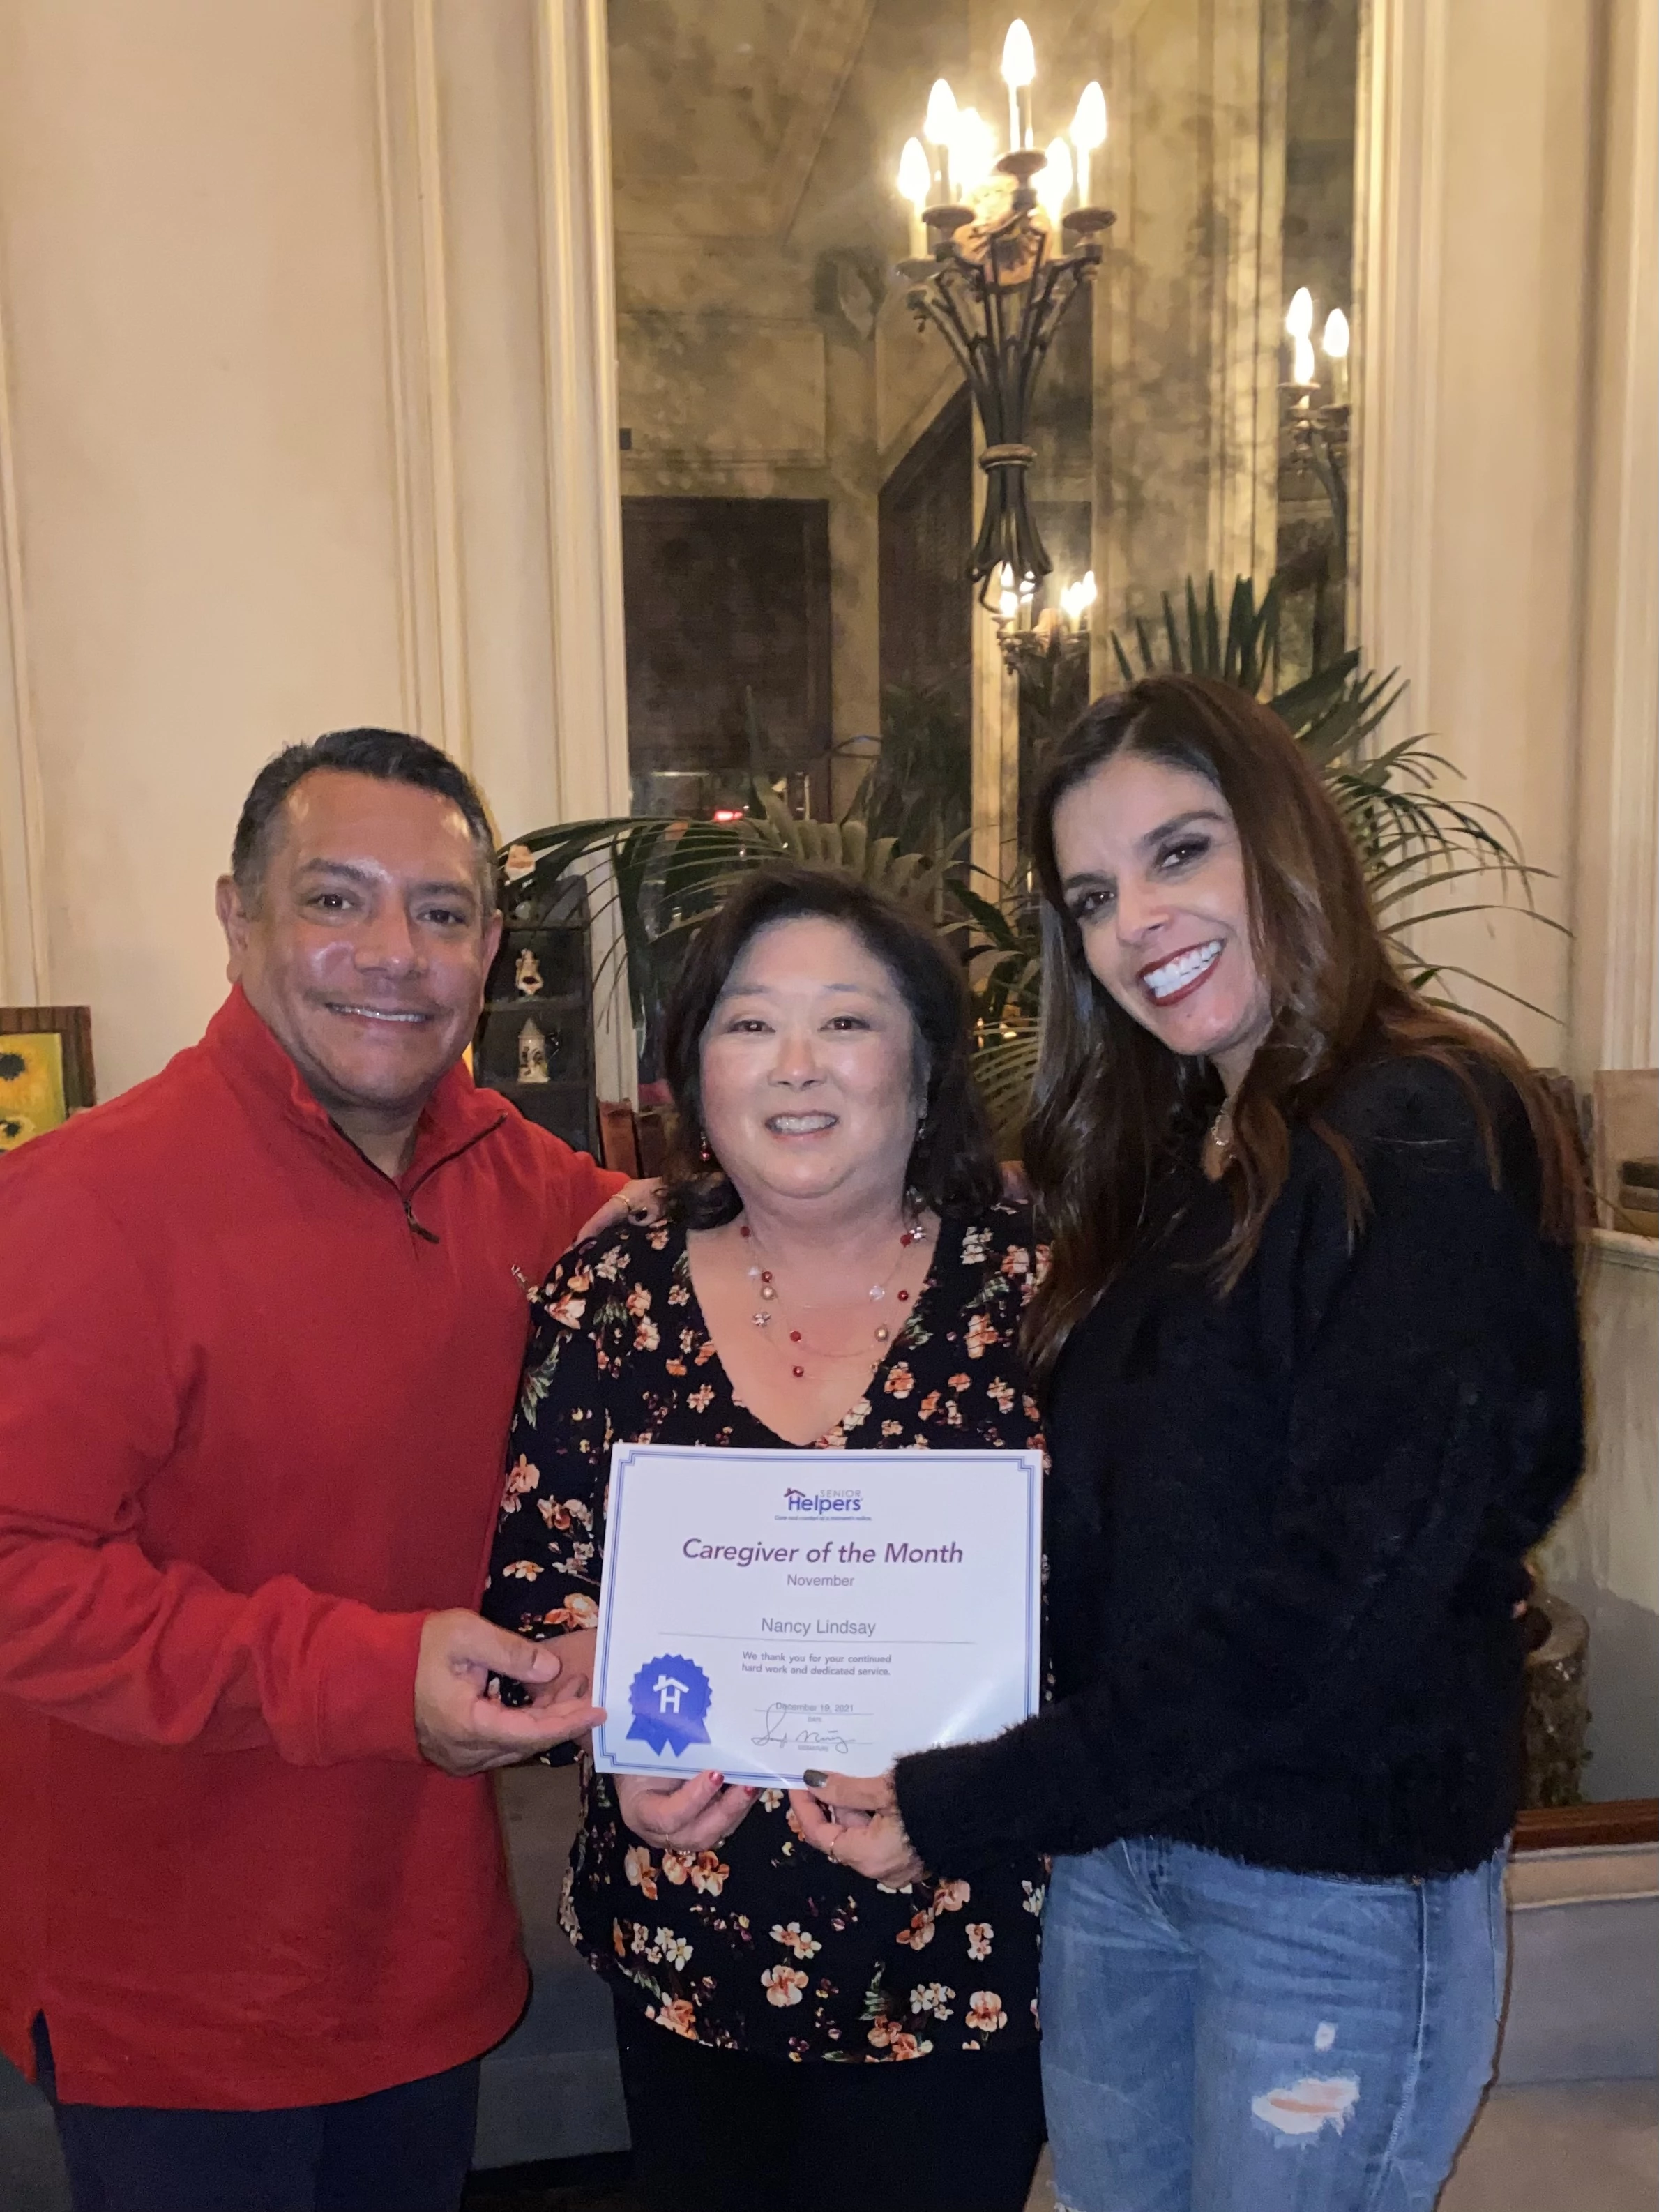 Proud to recognize Nancy Lindsay as our Caregiver of the Month for December. Nancy is a Gem, a constant professional, and a true Servant Leader who always goes beyond the call of duty. She is loved and appreciated by all of her clients and is truly appreciated by us. Nancy, way to go!